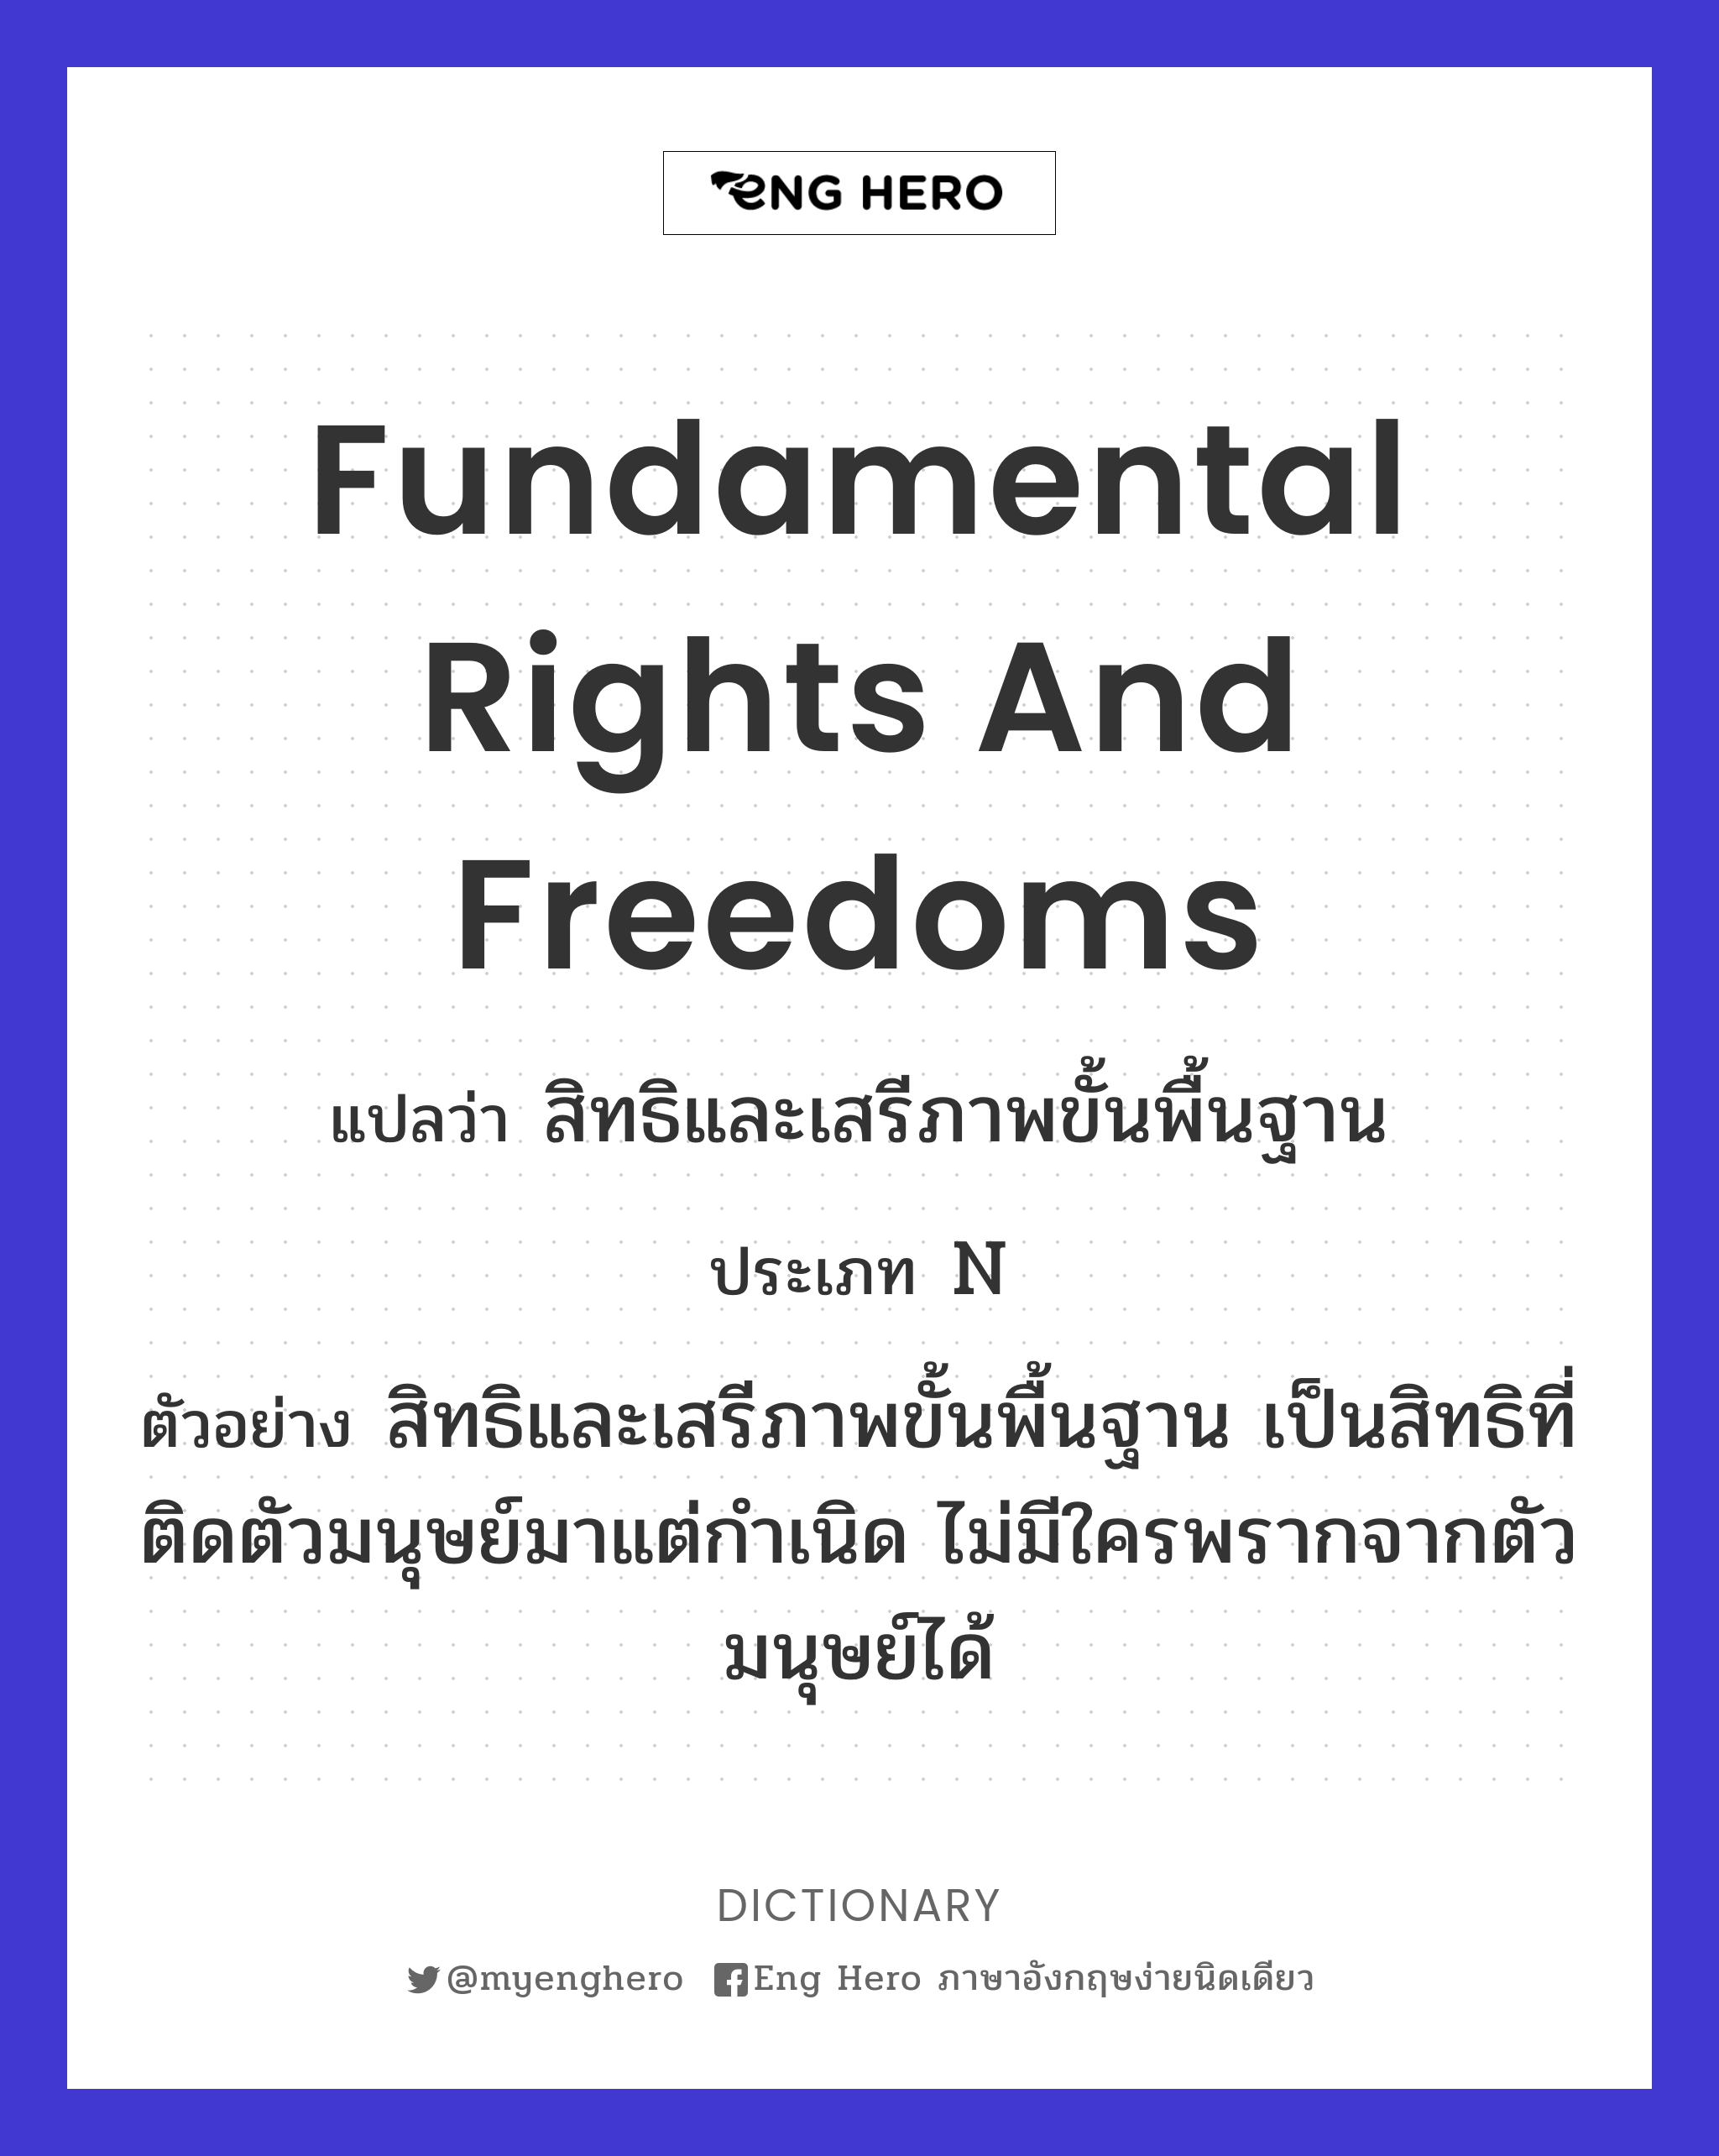 fundamental rights and freedoms